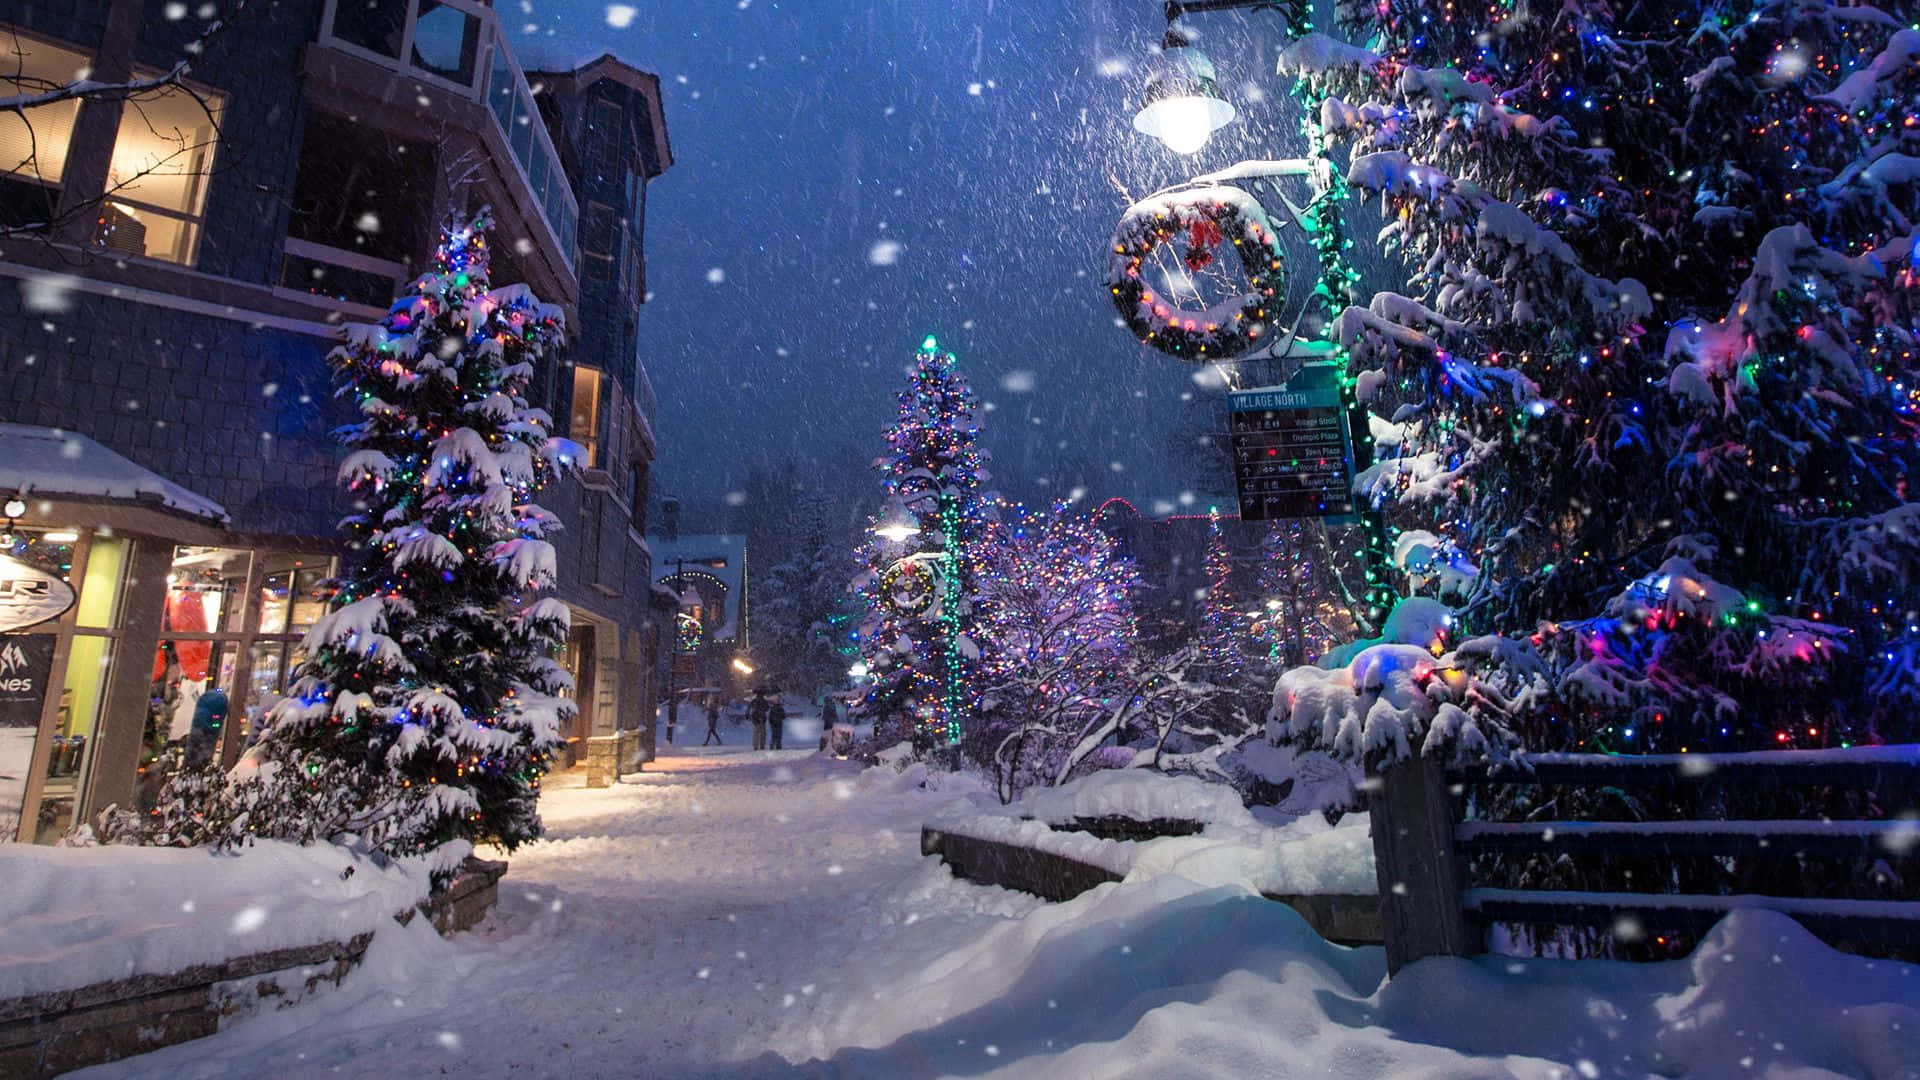 A Street With Christmas Trees And Lights In The Snow Wallpaper